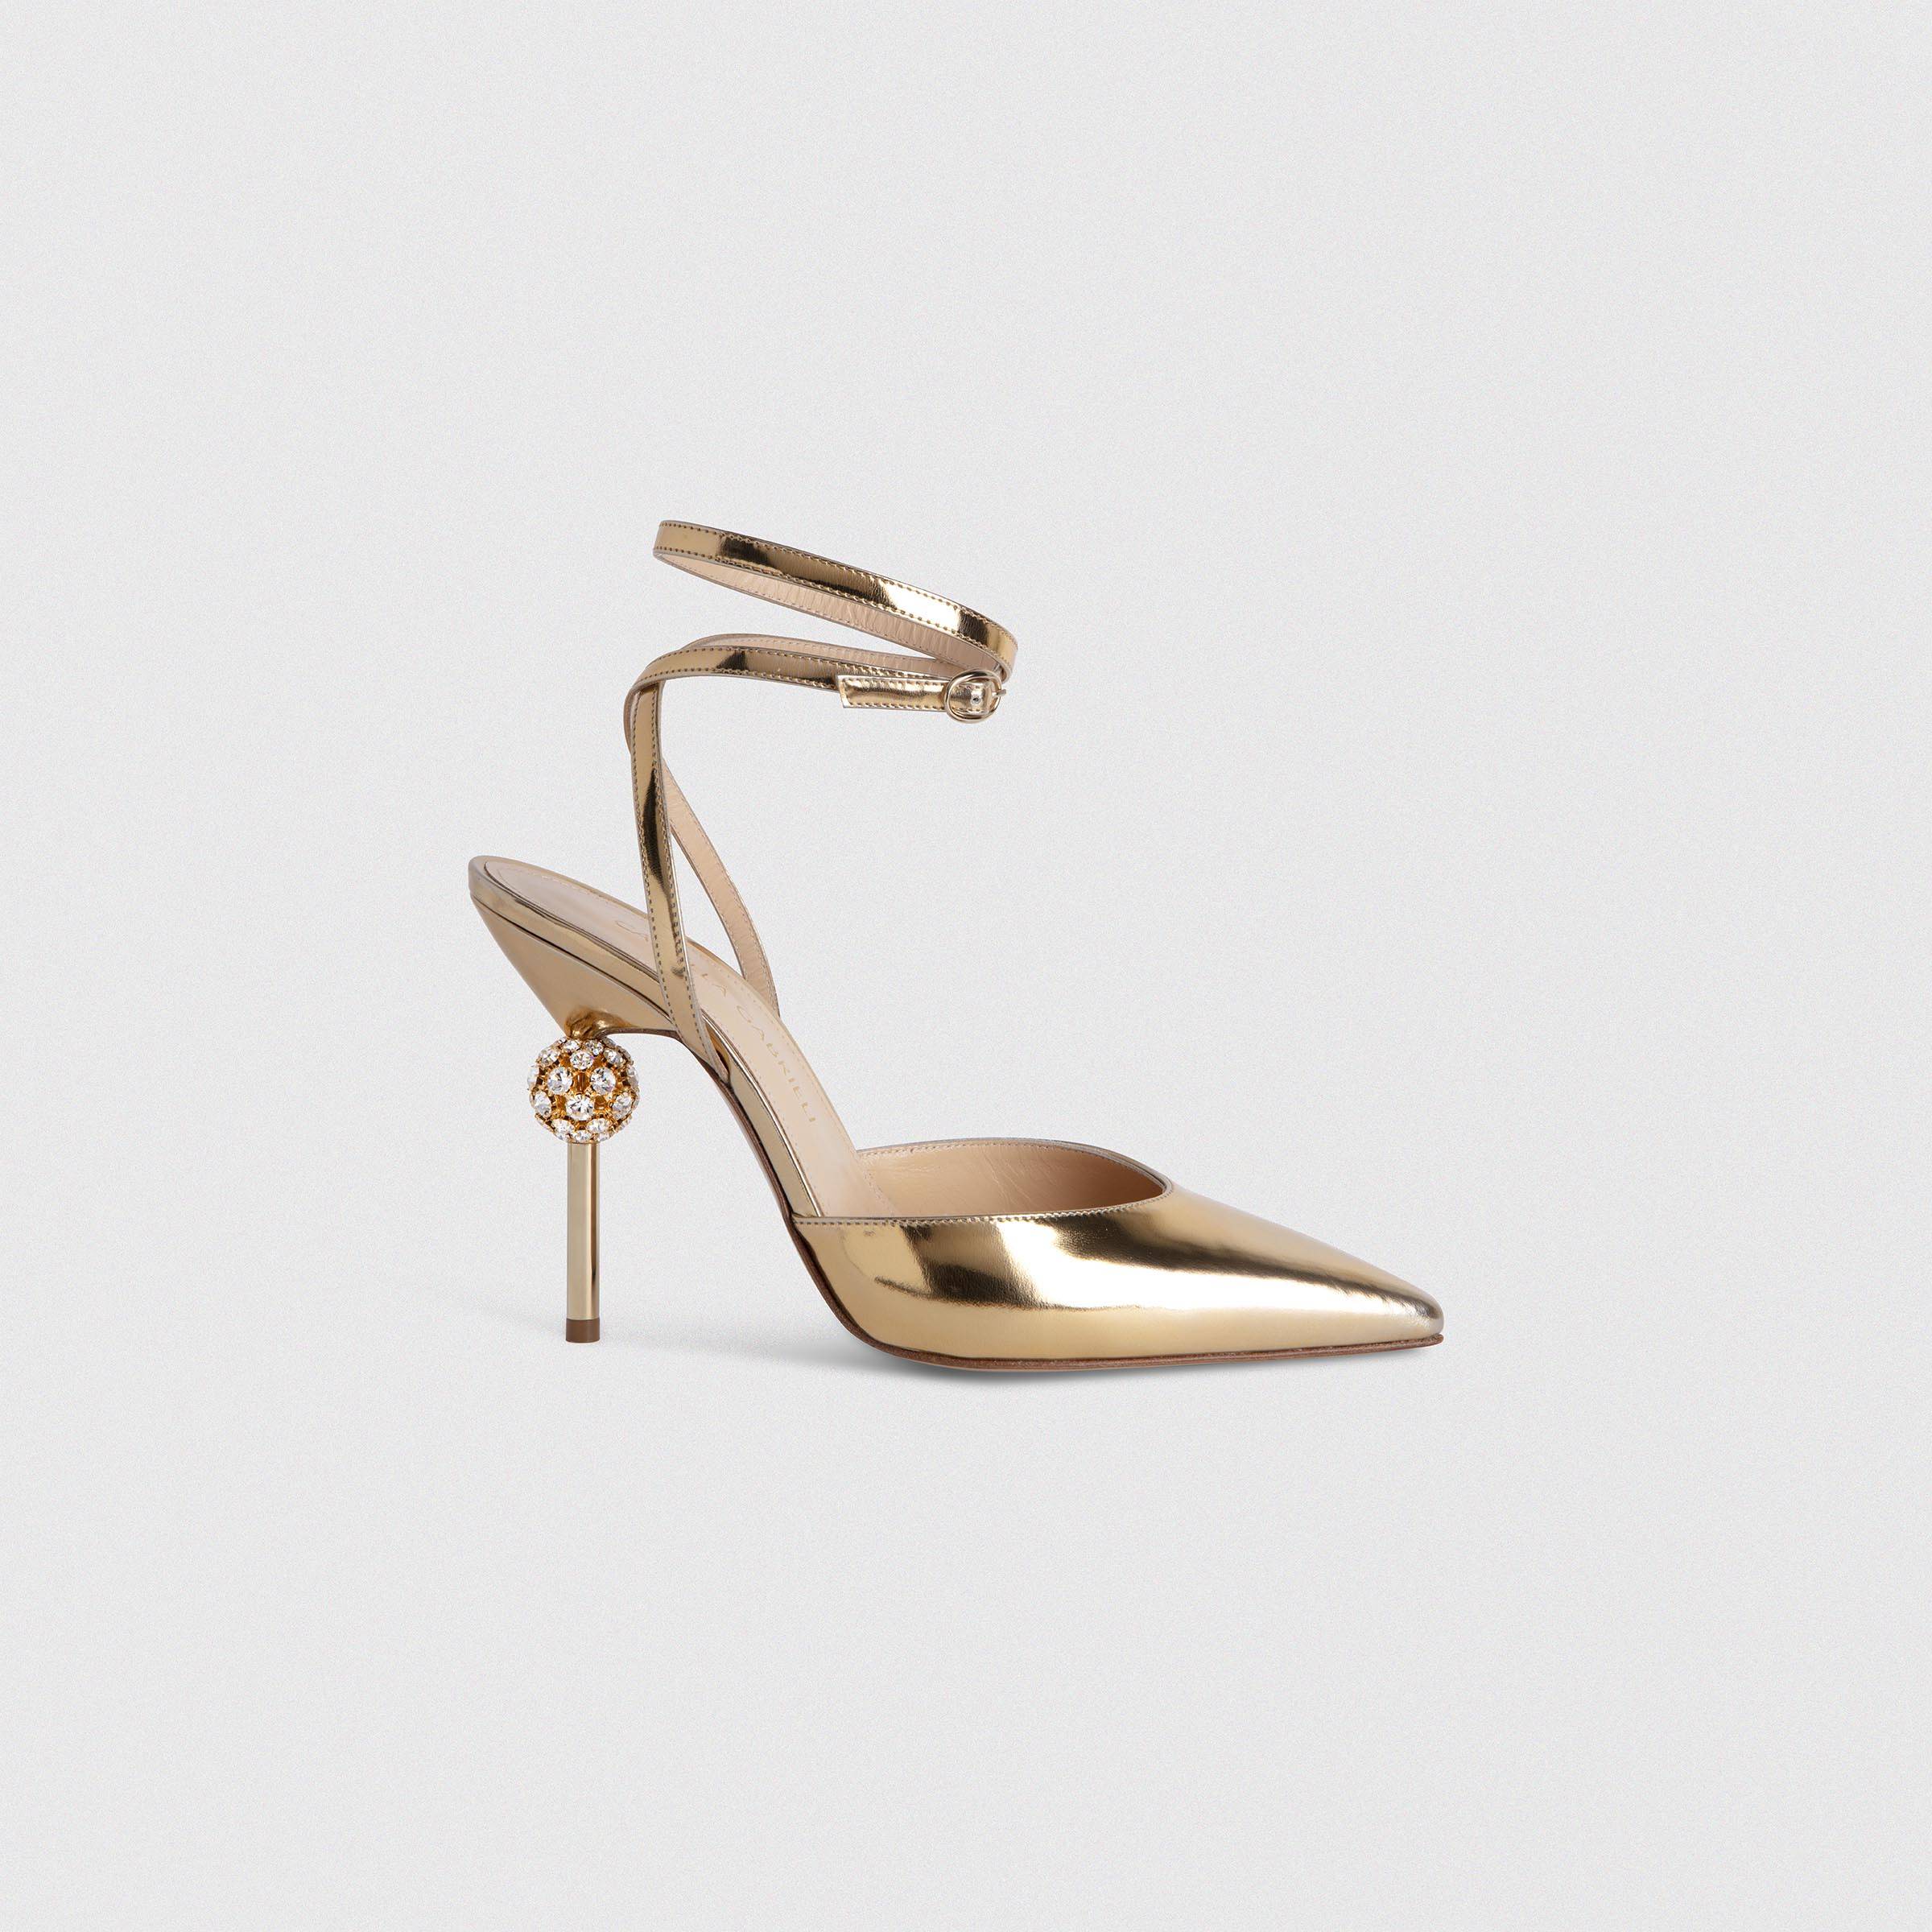 Slingback pumps in mirror gold leather